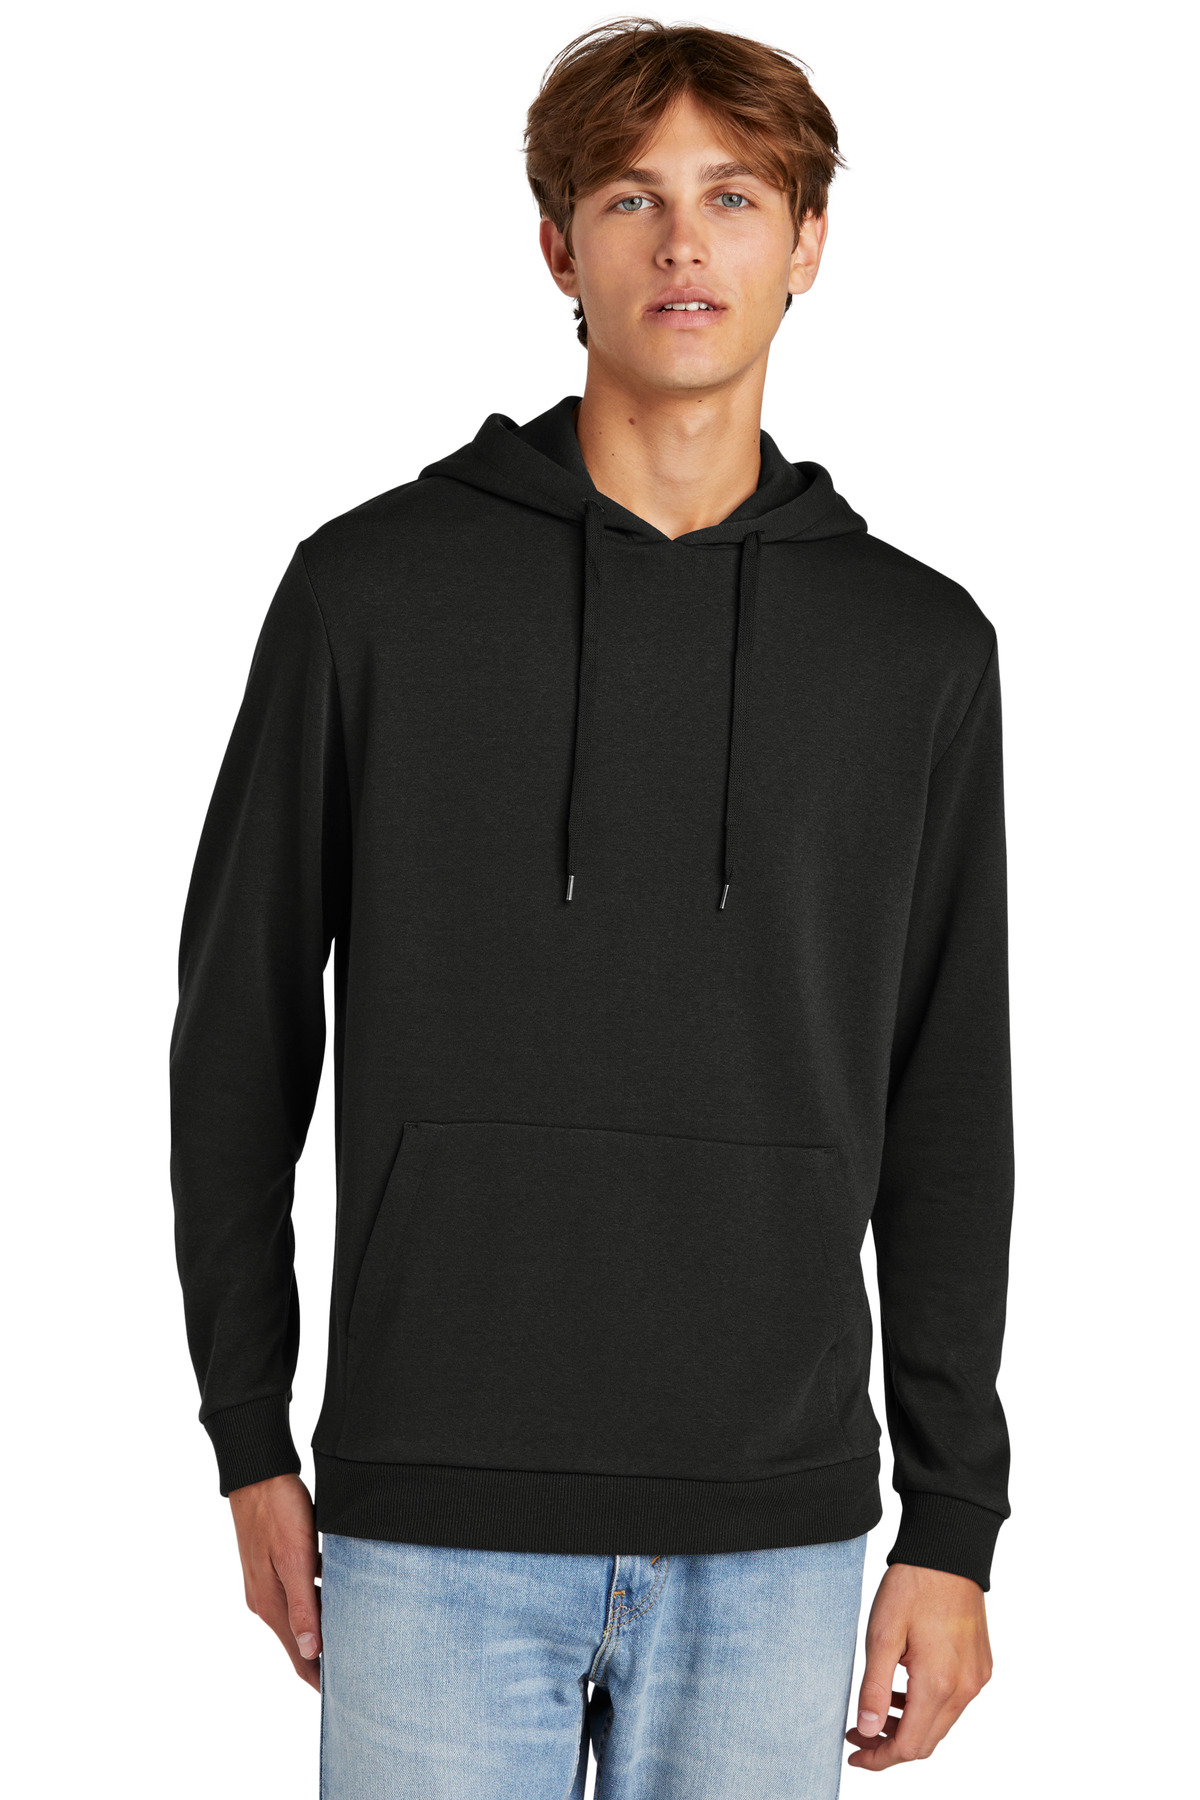 District® DT1300 - Perfect Tri® Fleece Pullover Hoodie